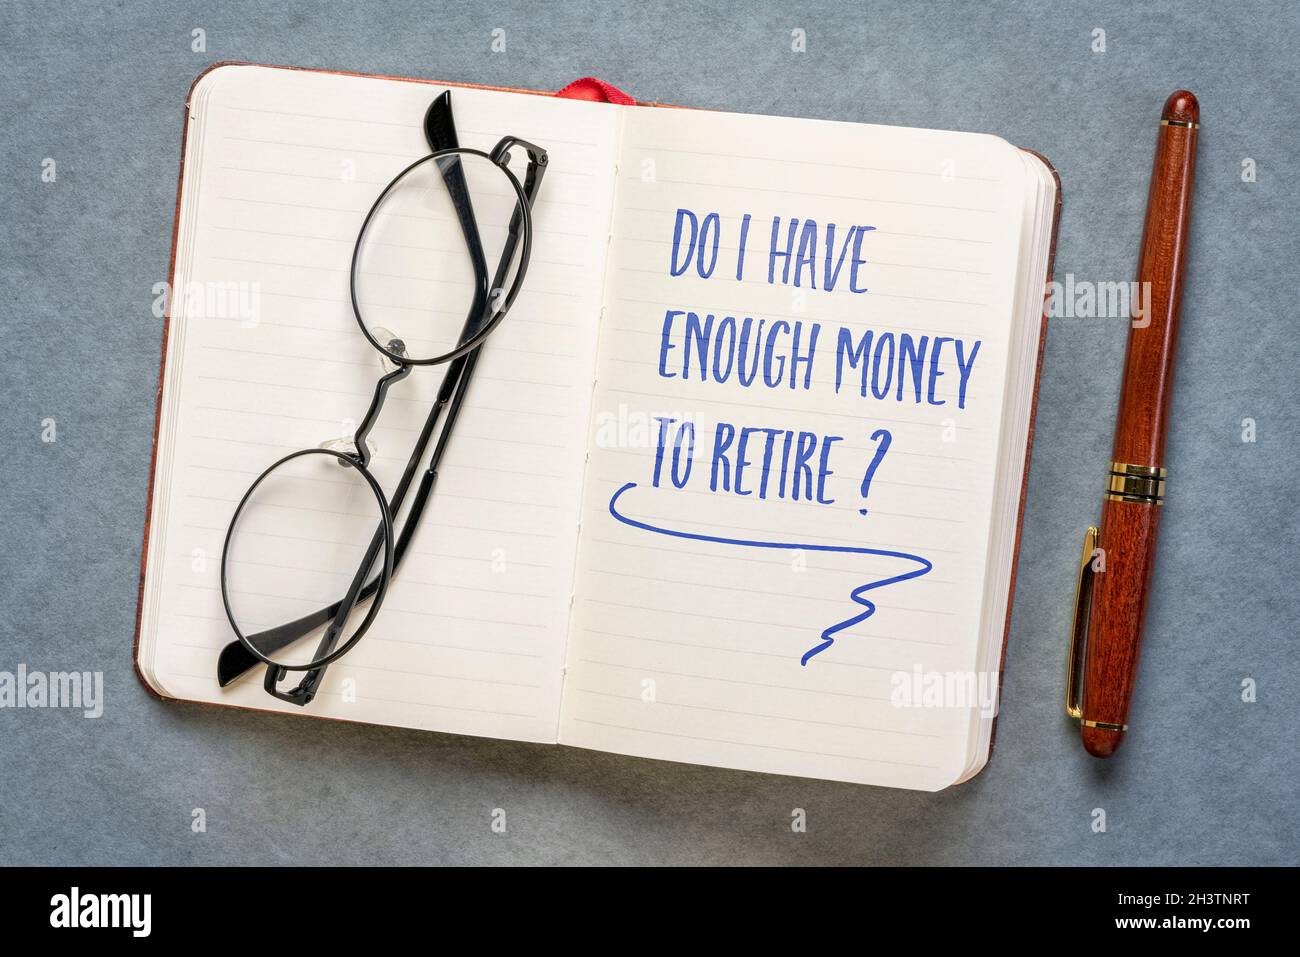 Do I have enough to retire? Handwriting in a notebook or journal. Finance and retirement planning concept. Stock Photo